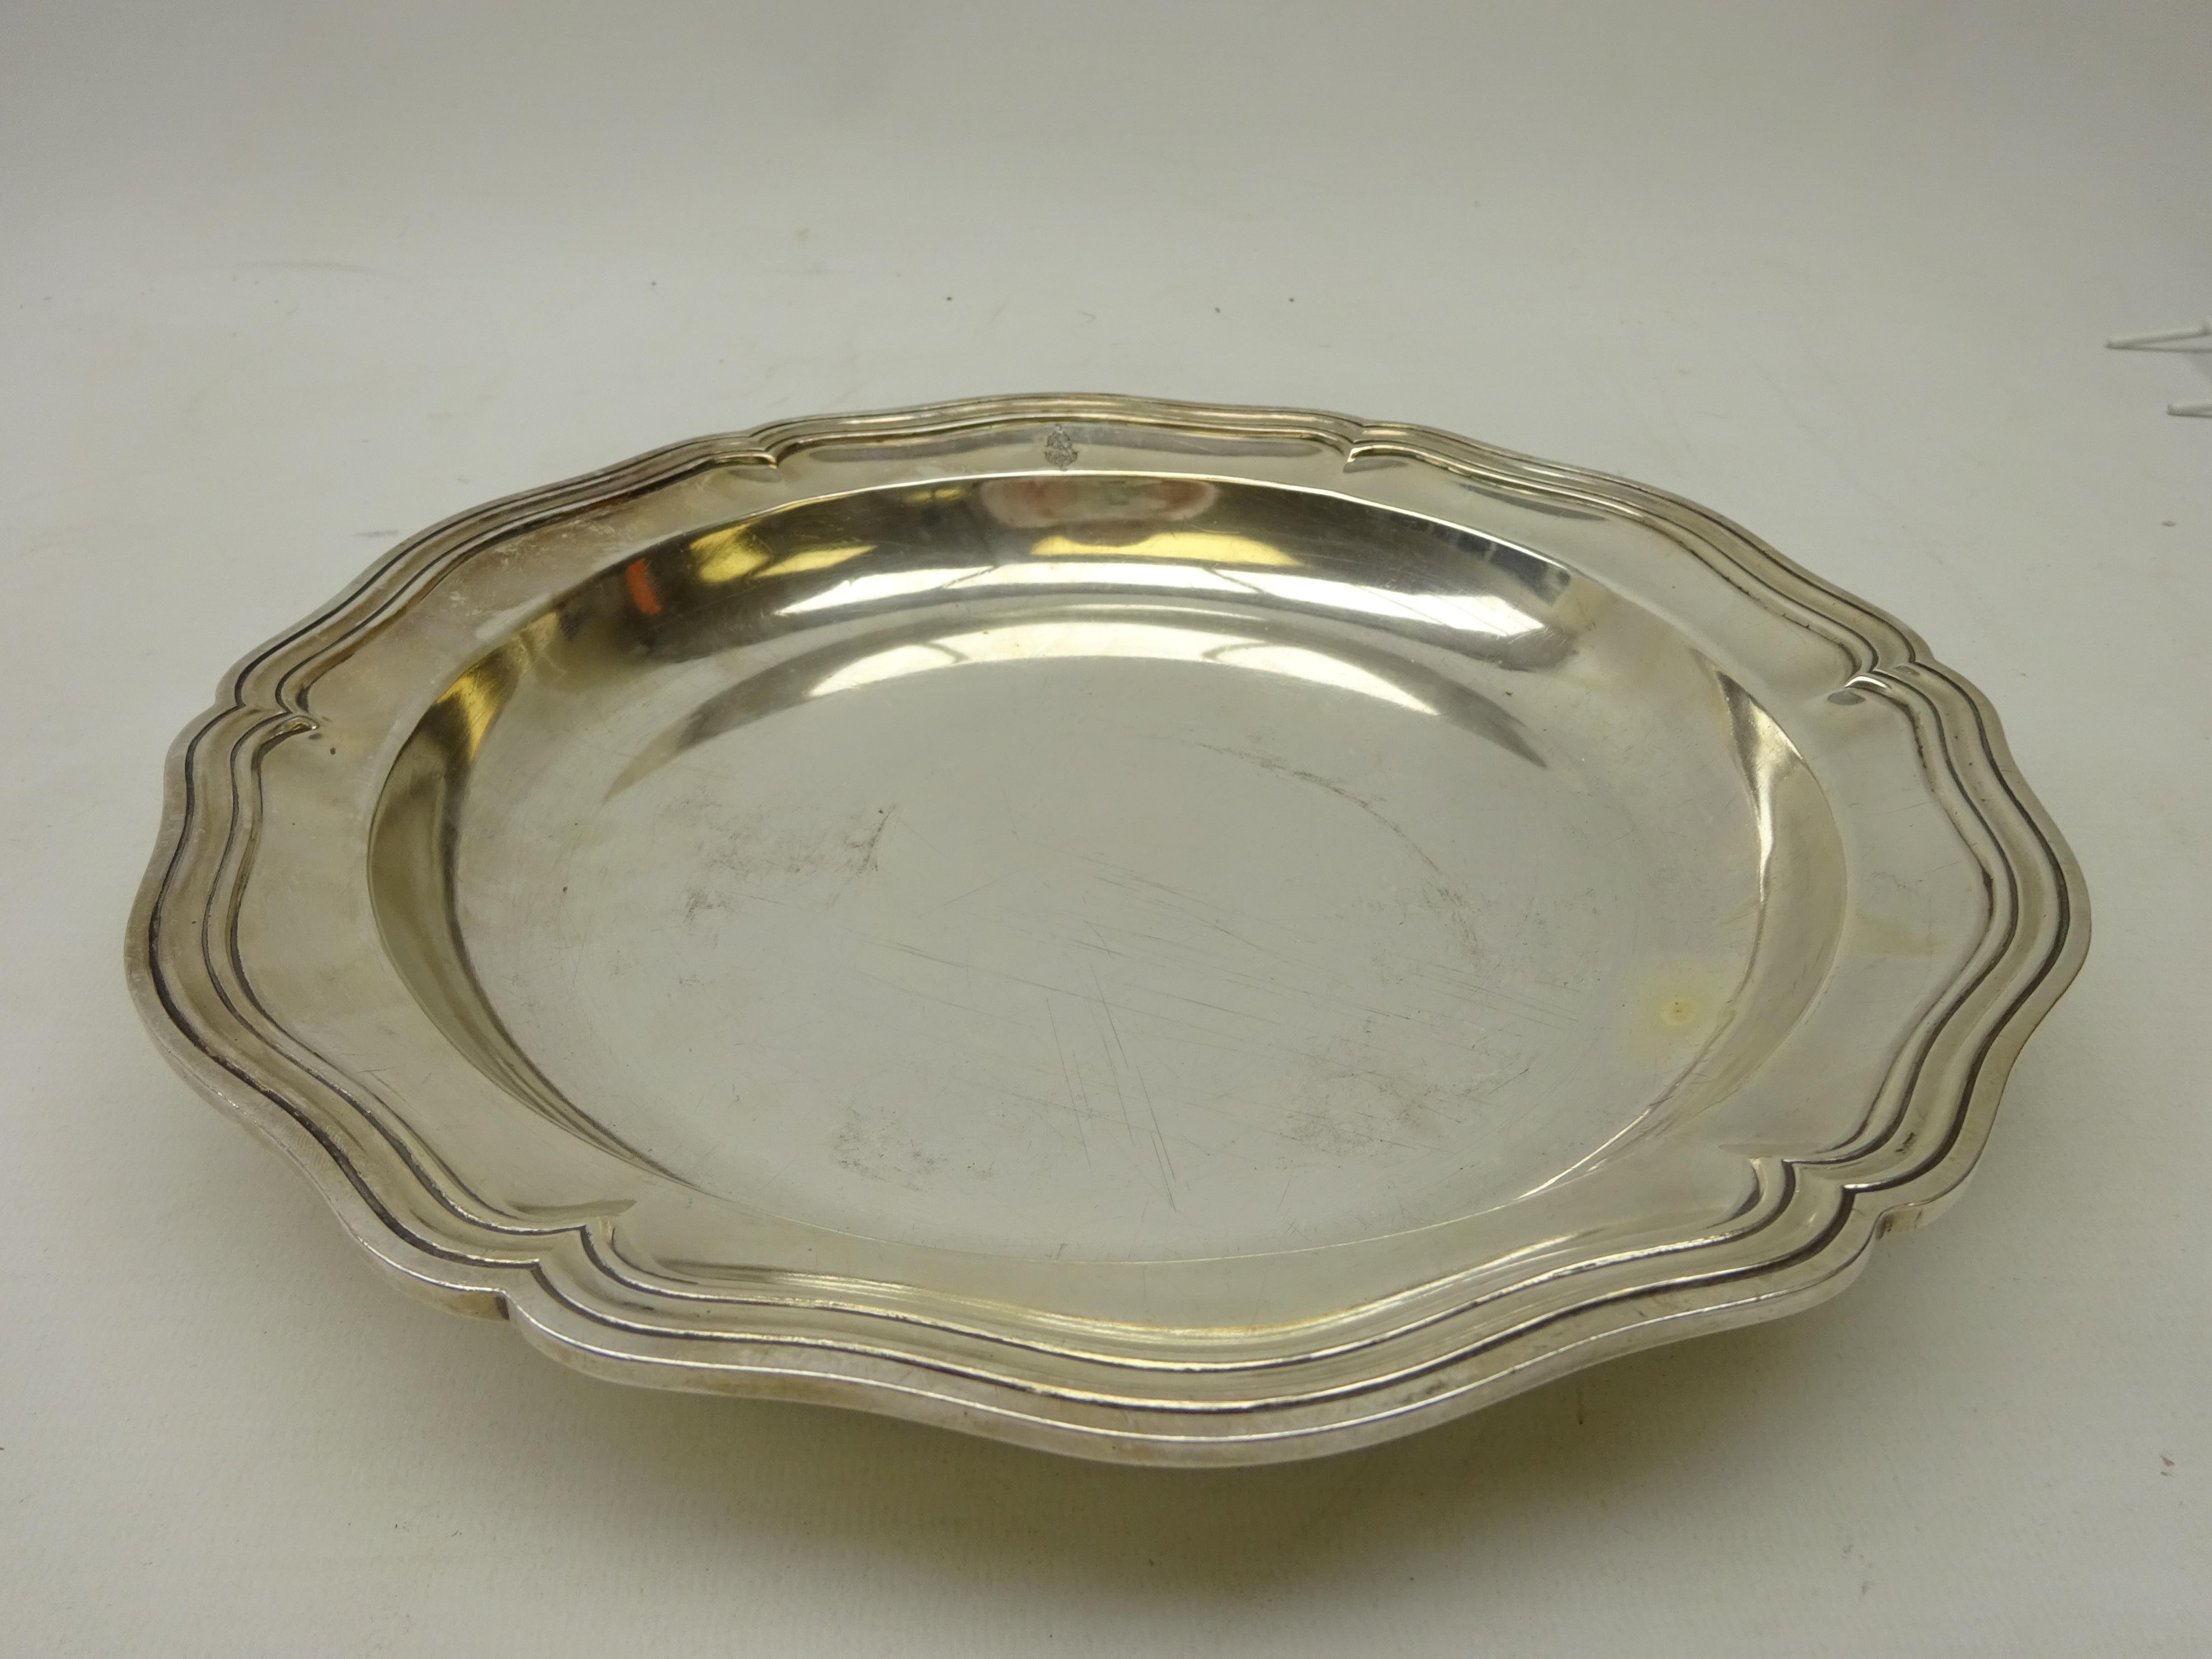 Late 19th century Christofle silver-plated tureen and cover with scalloped edge, - Image 17 of 18